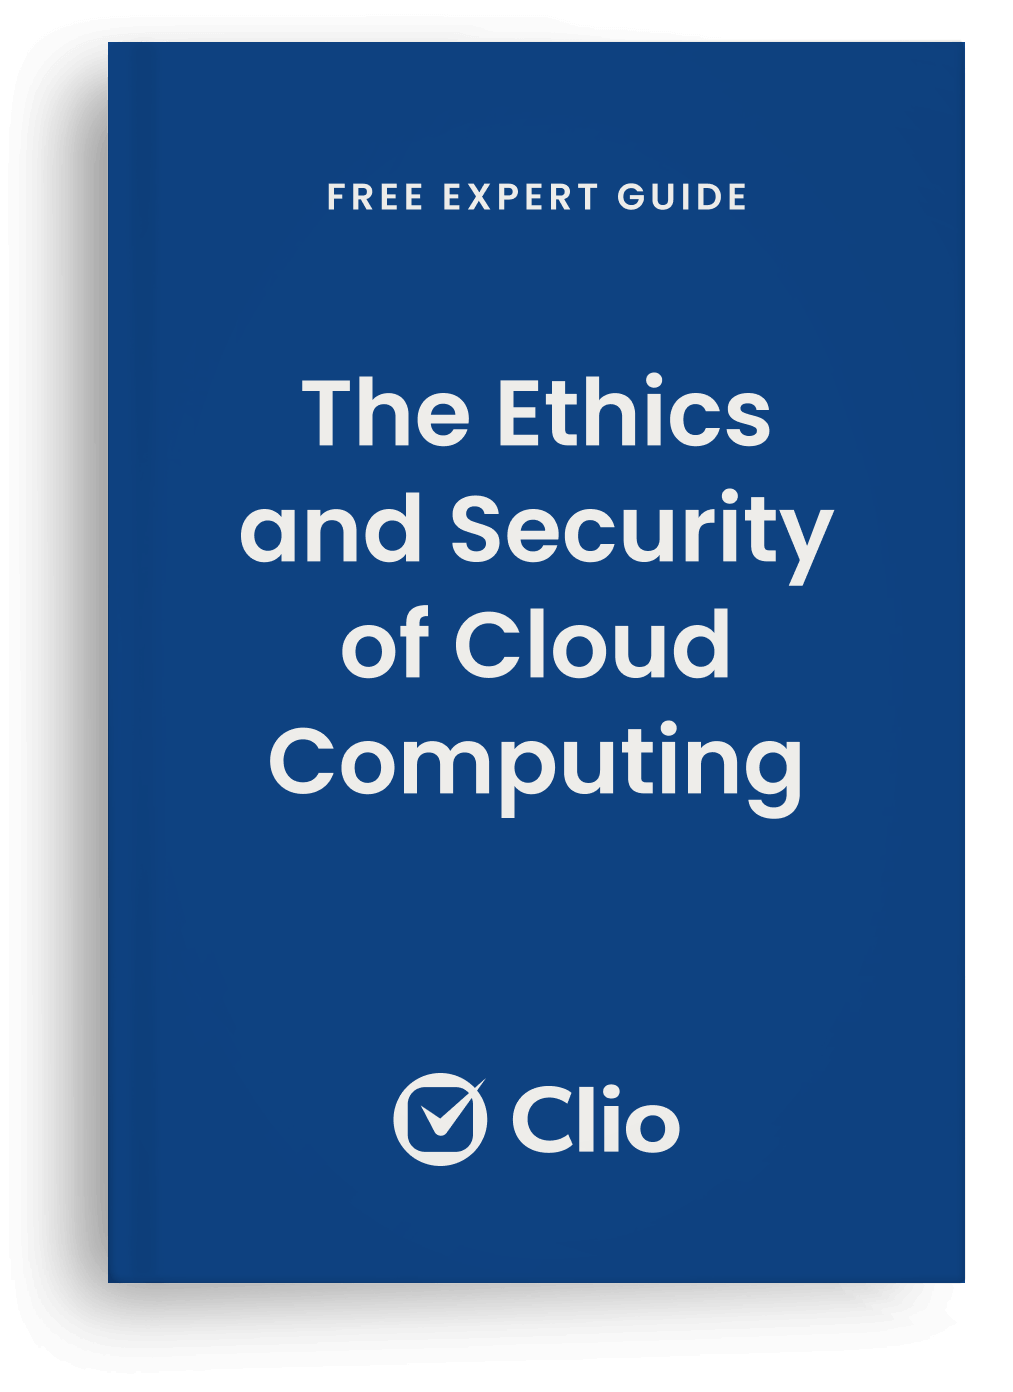 The Ethics and Security of Cloud Computing